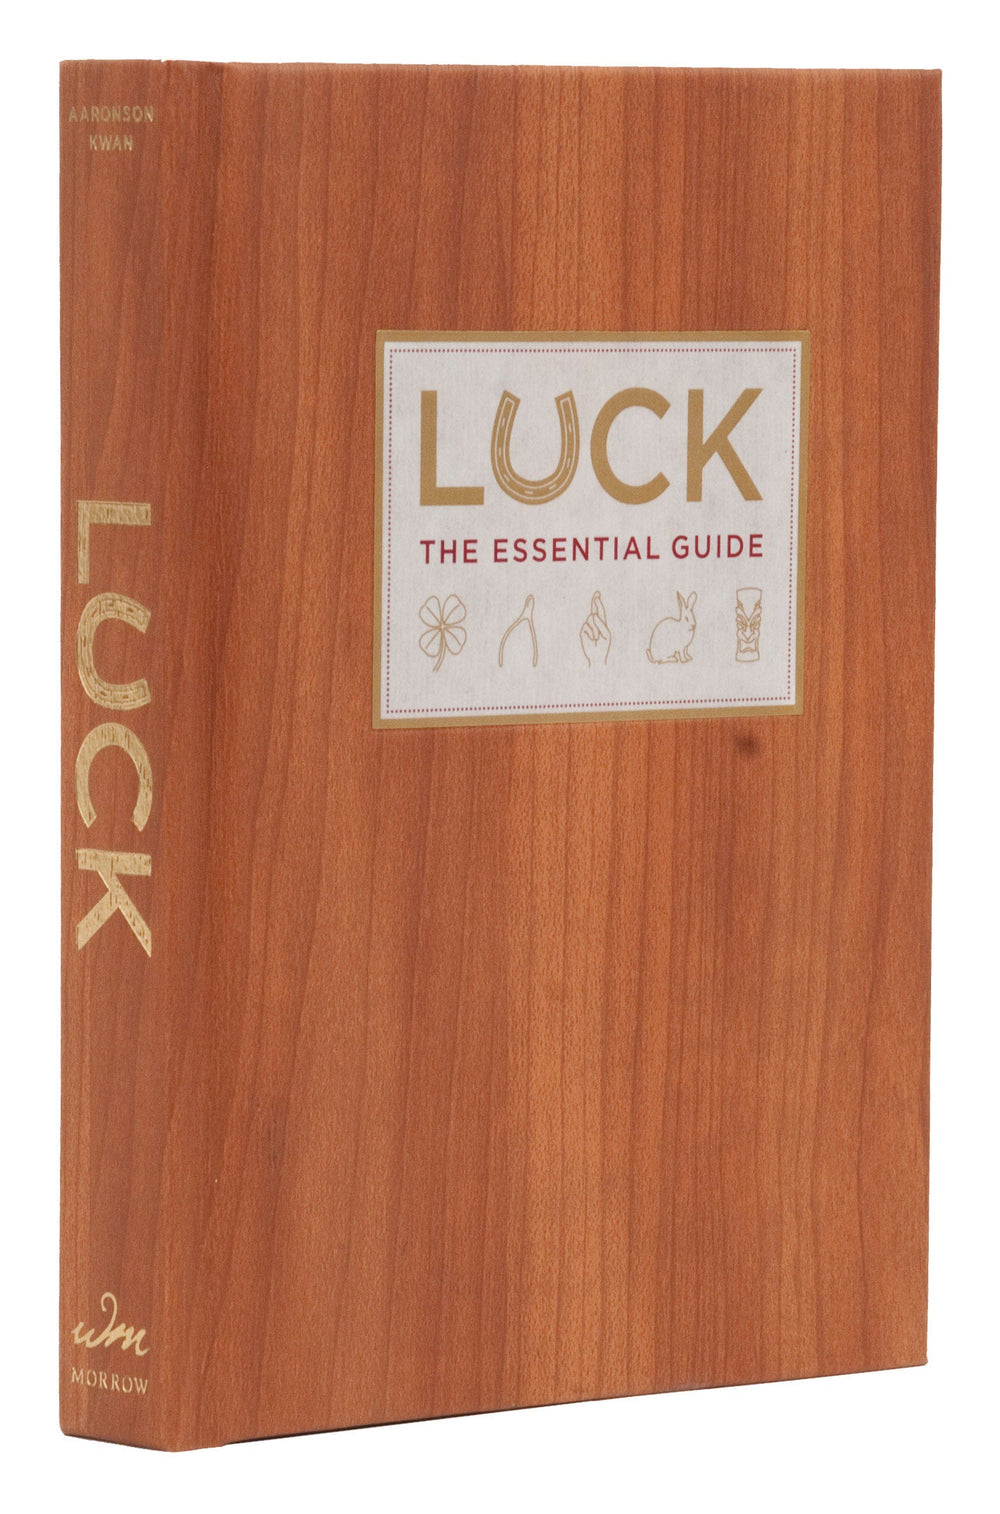 Luck - The Essential Guide